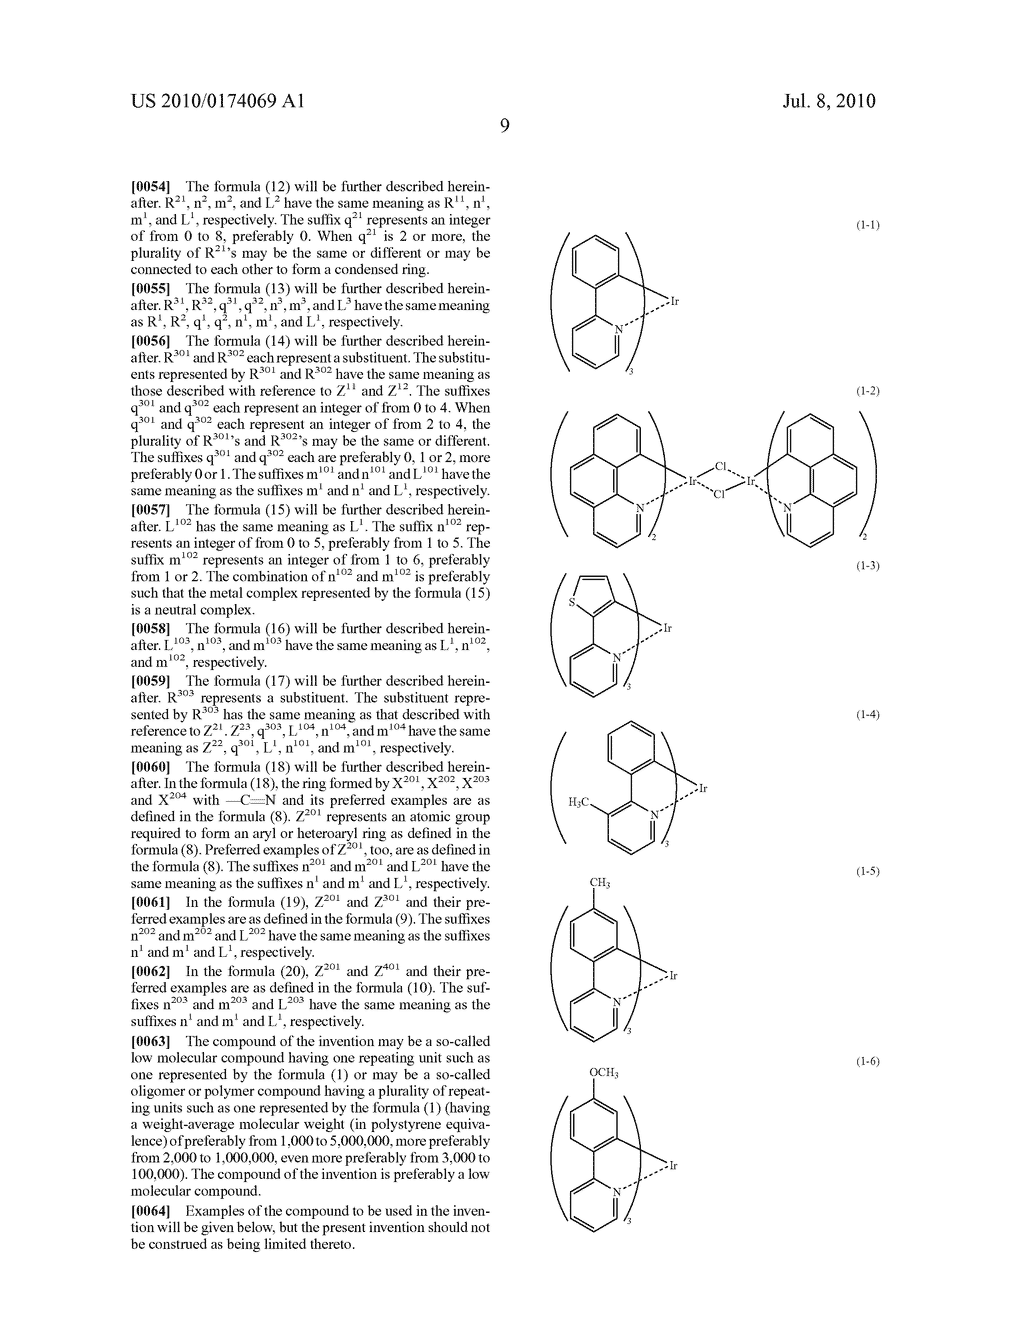 LIGHT-EMITTING MATERIAL COMPRISING ORTHOMETALATED IRIDIUM COMPLEX, LIGHT-EMITTING DEVICE, HIGH EFFICIENCY RED LIGHT-EMITTING DEVICE, AND NOVEL IRIDIUM COMPLEX - diagram, schematic, and image 10